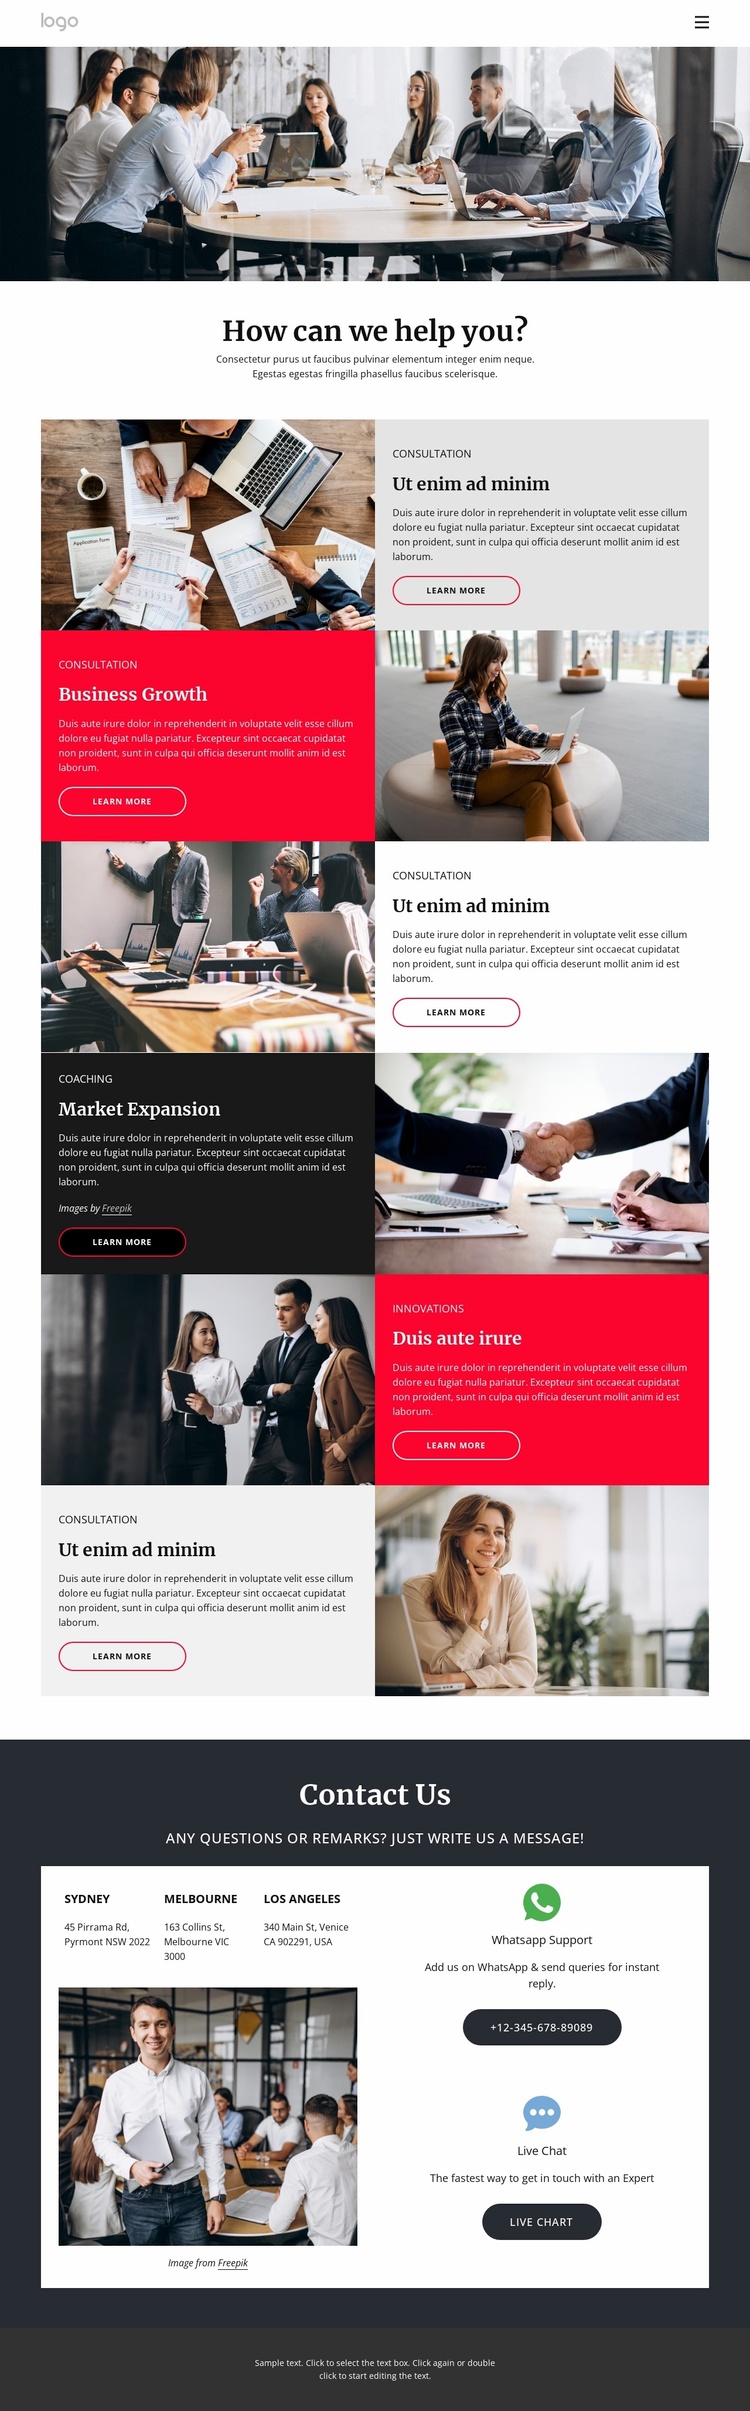 Consulting consultations Website Template